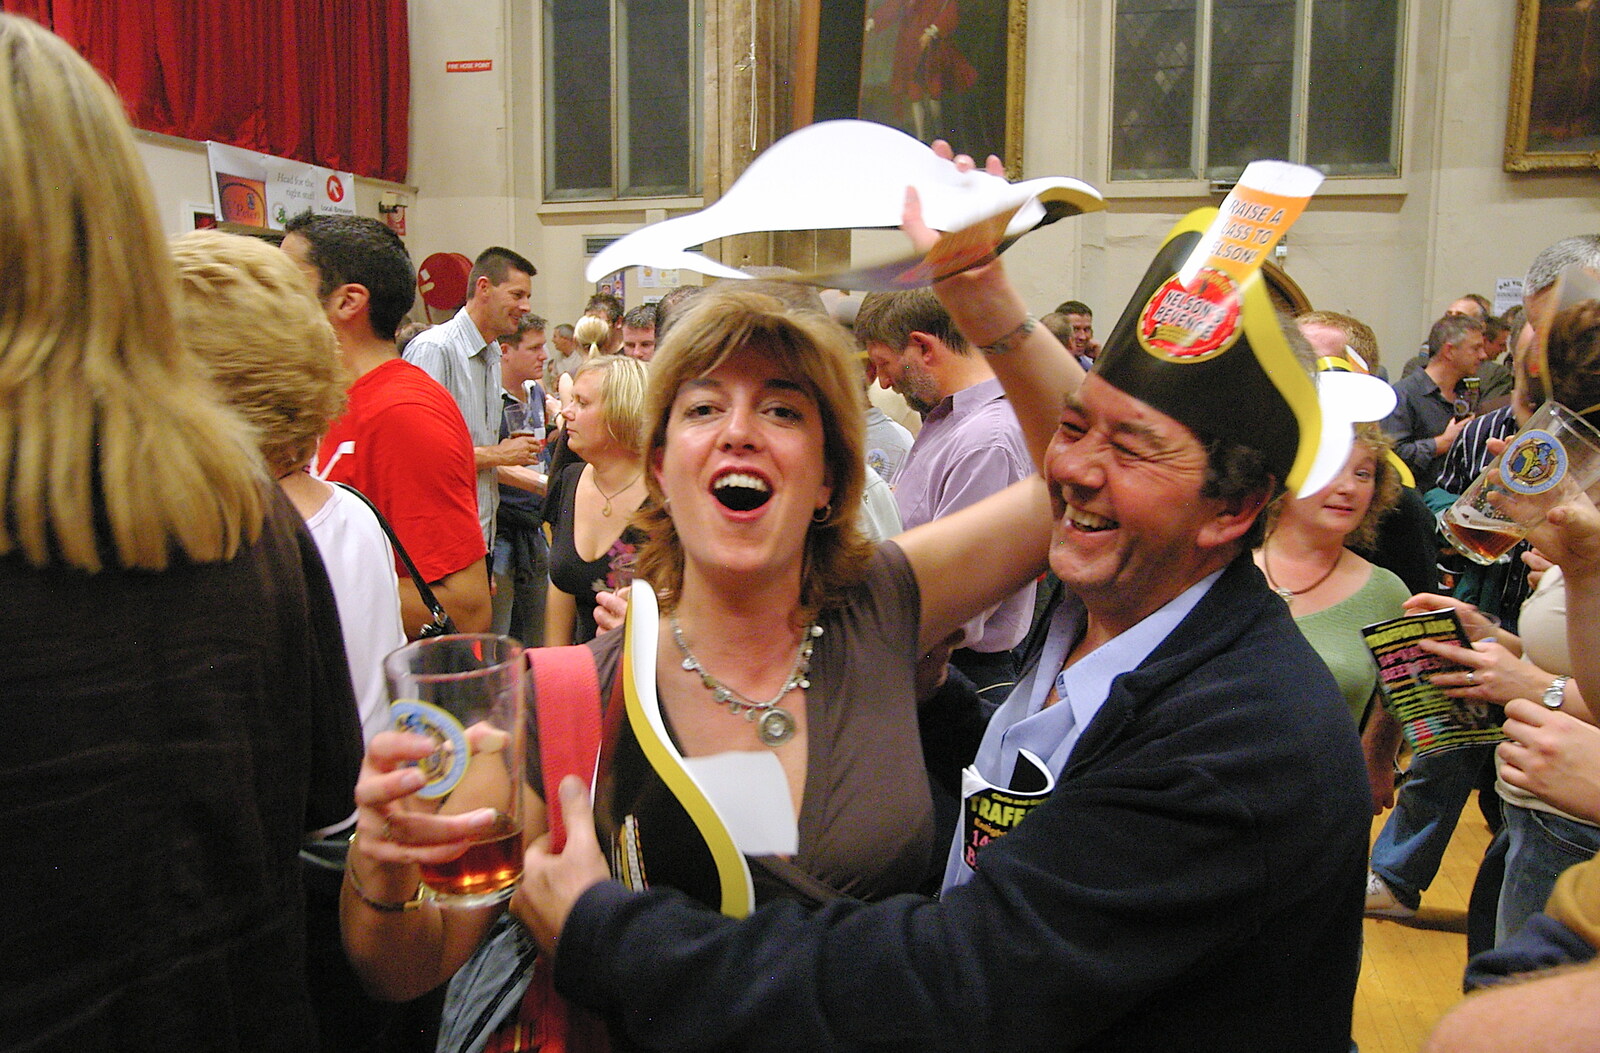 The 28th Norwich Beer Festival, St. Andrew's Hall, Norwich - 26th October 2005: People with paper 'Nelson' hats